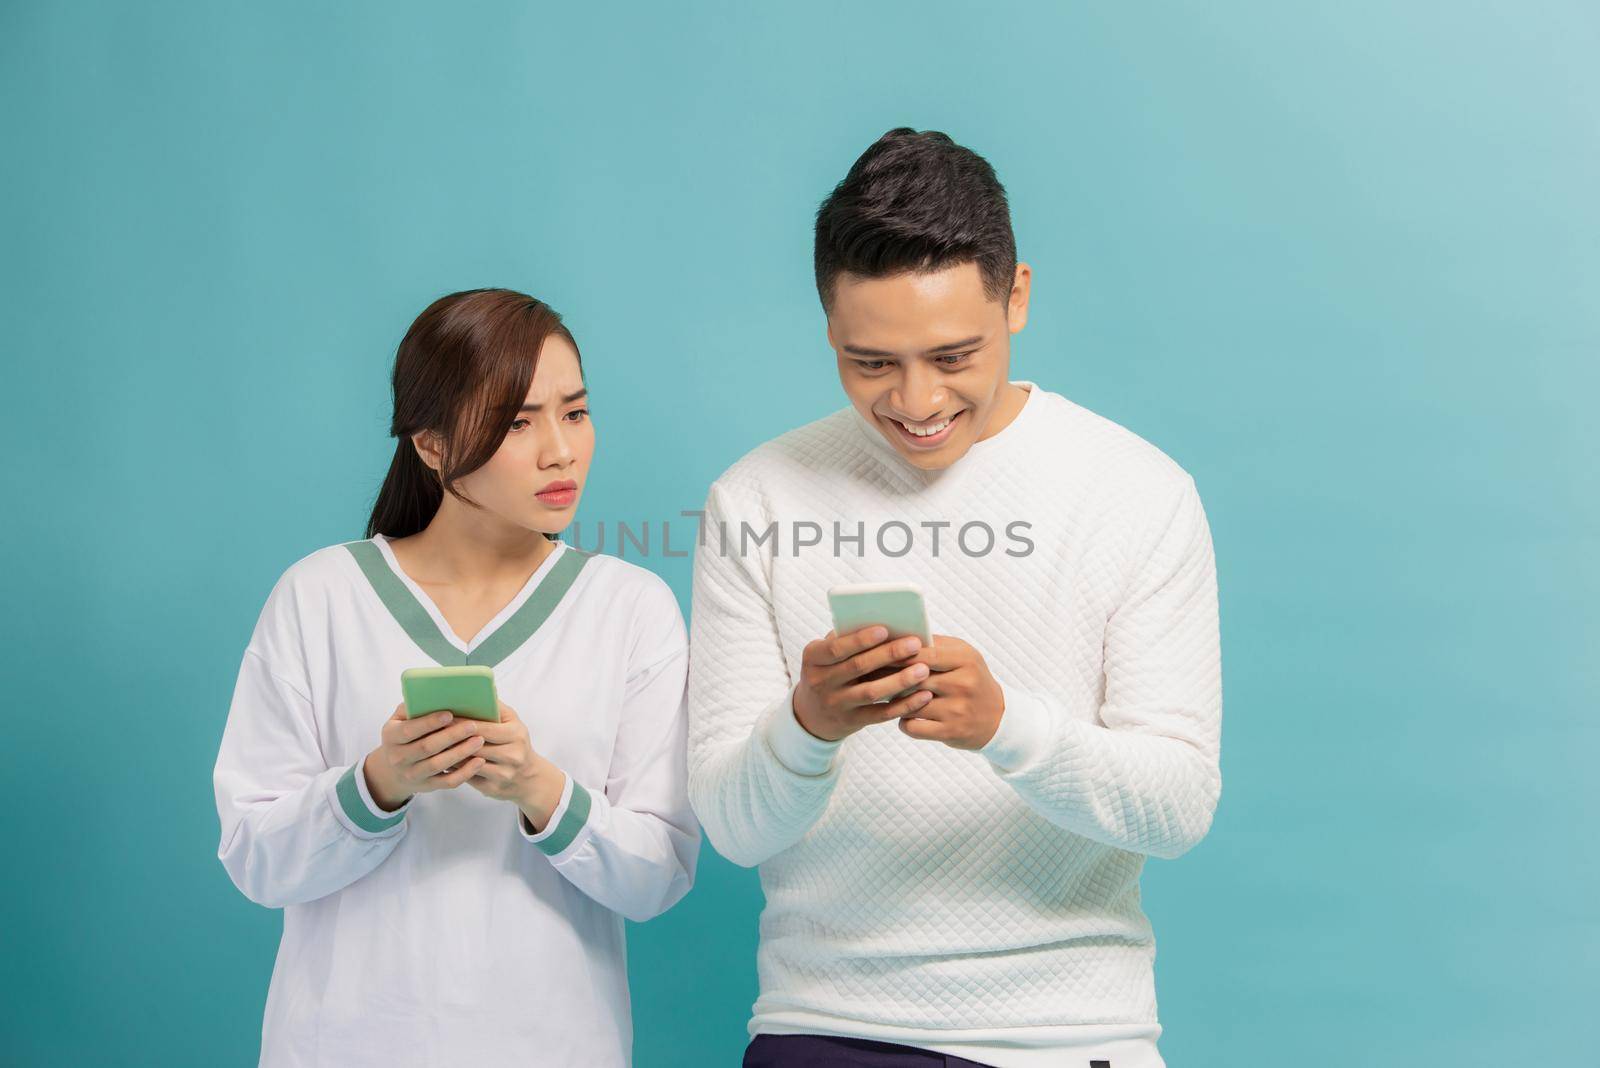 Curious woman spying and peeping at smartphone of his boyfriend while They standing together over light background